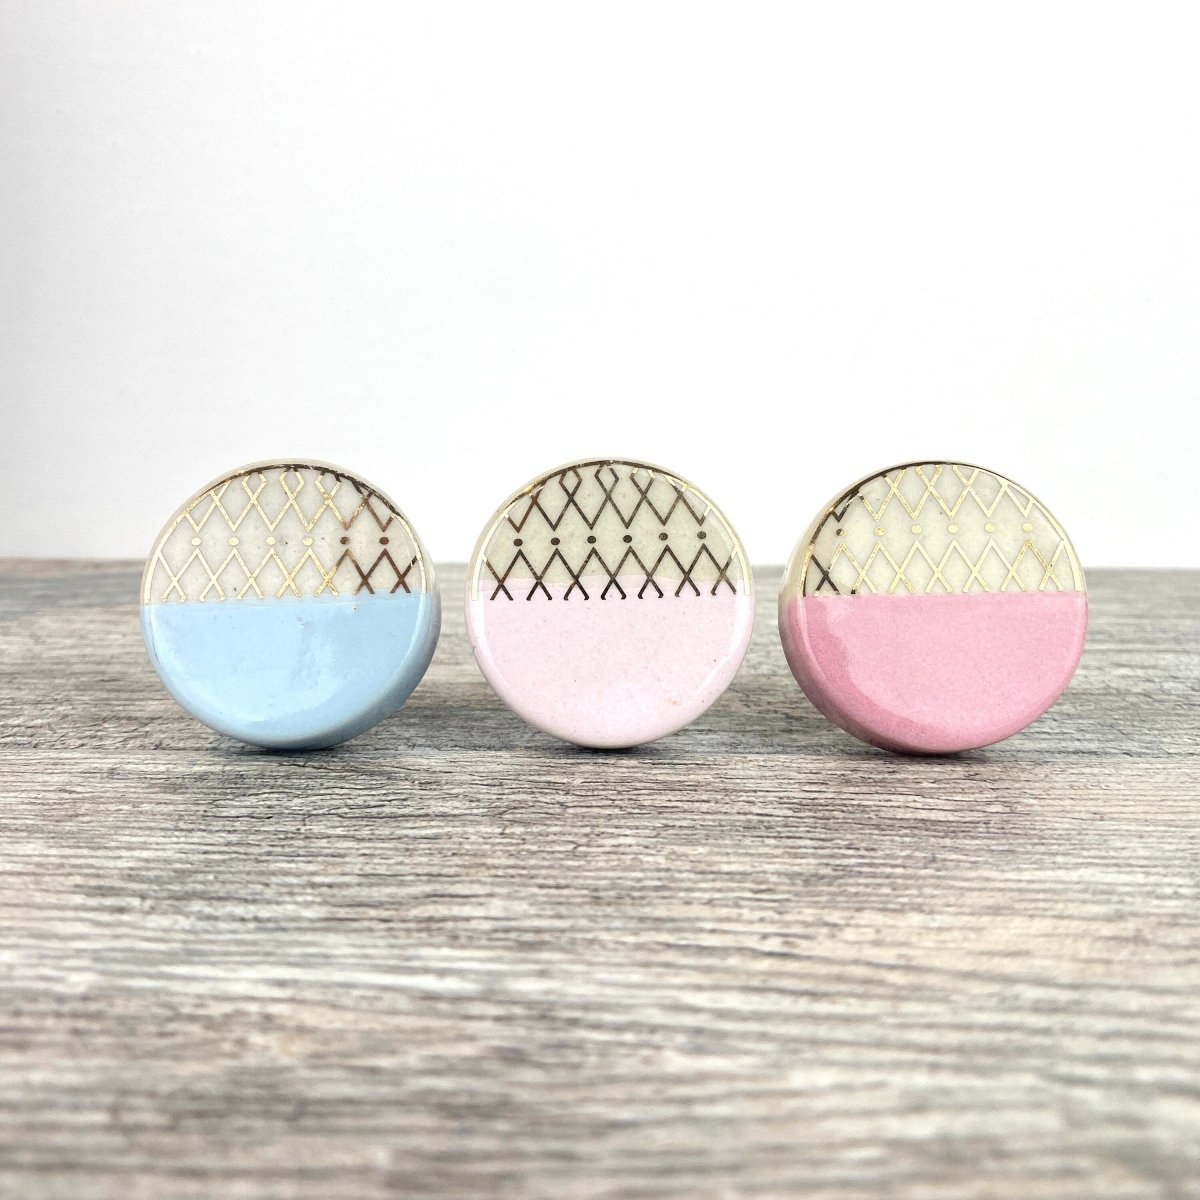 Ceramic Drawer Knobs with Gold Detail in Pink and Blue - DaRosa Creations